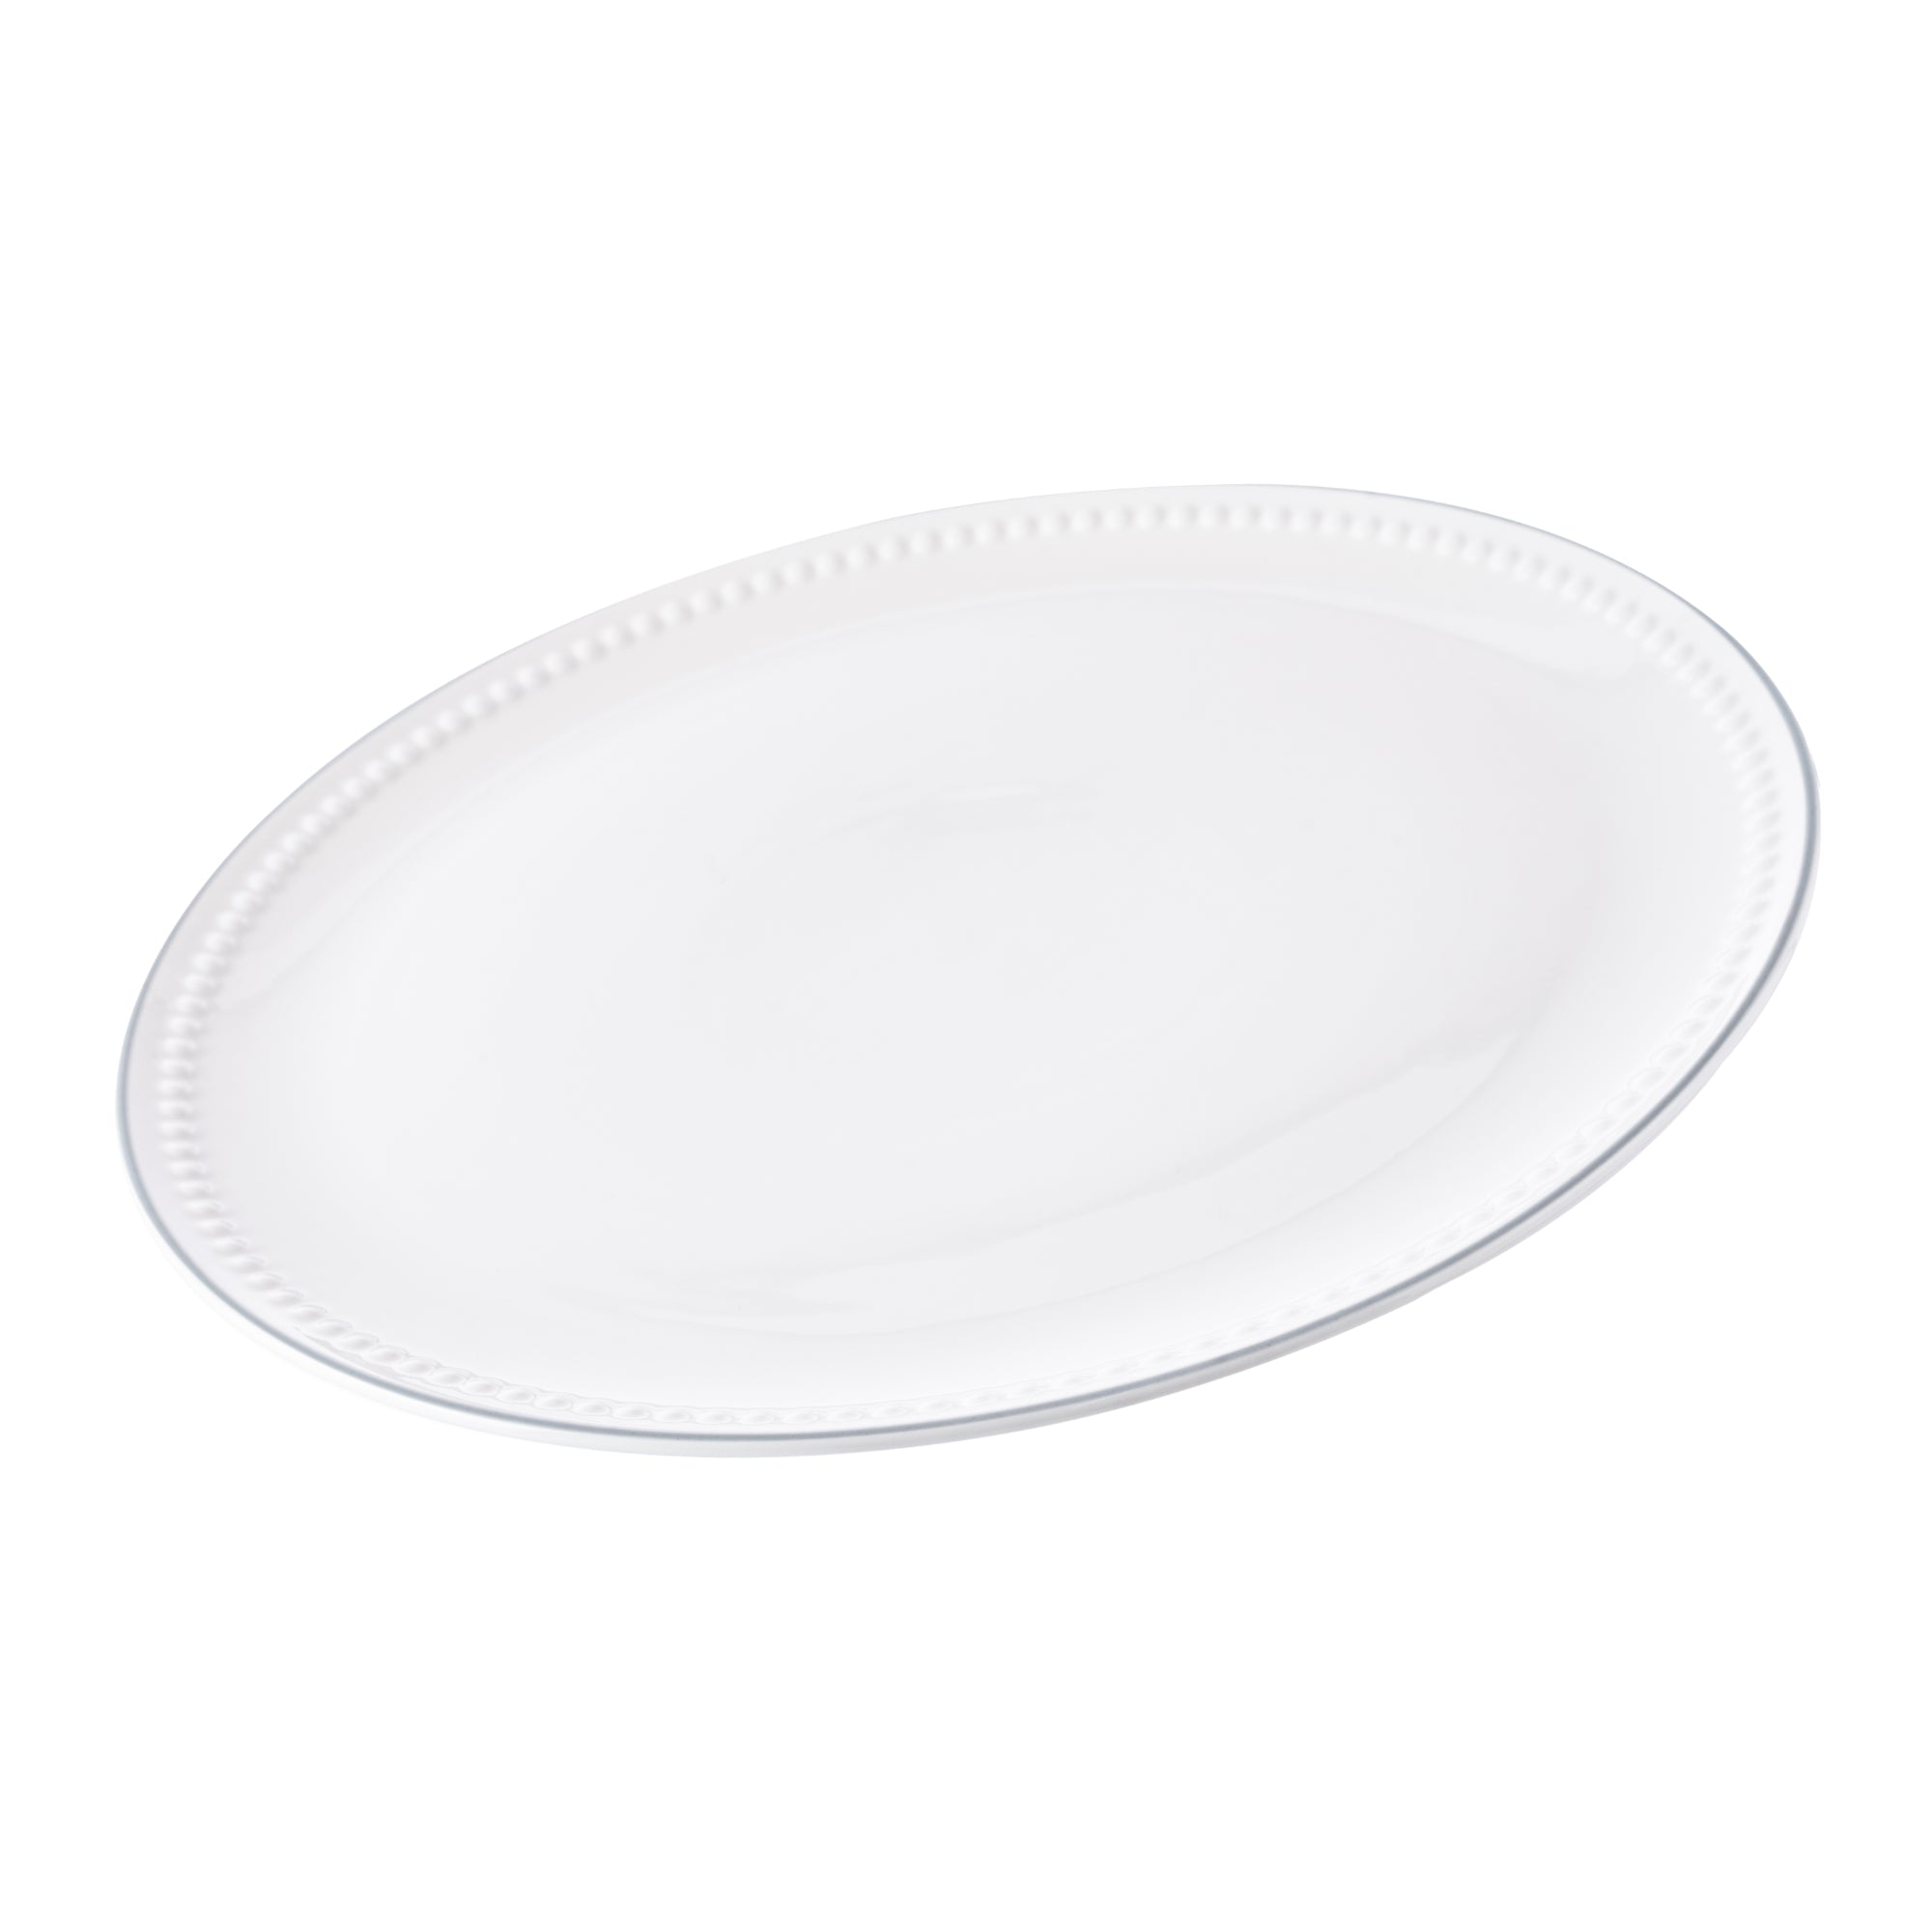 MARY BERRY SIGNATURE ROUND SERVING PLATTER | 32CM